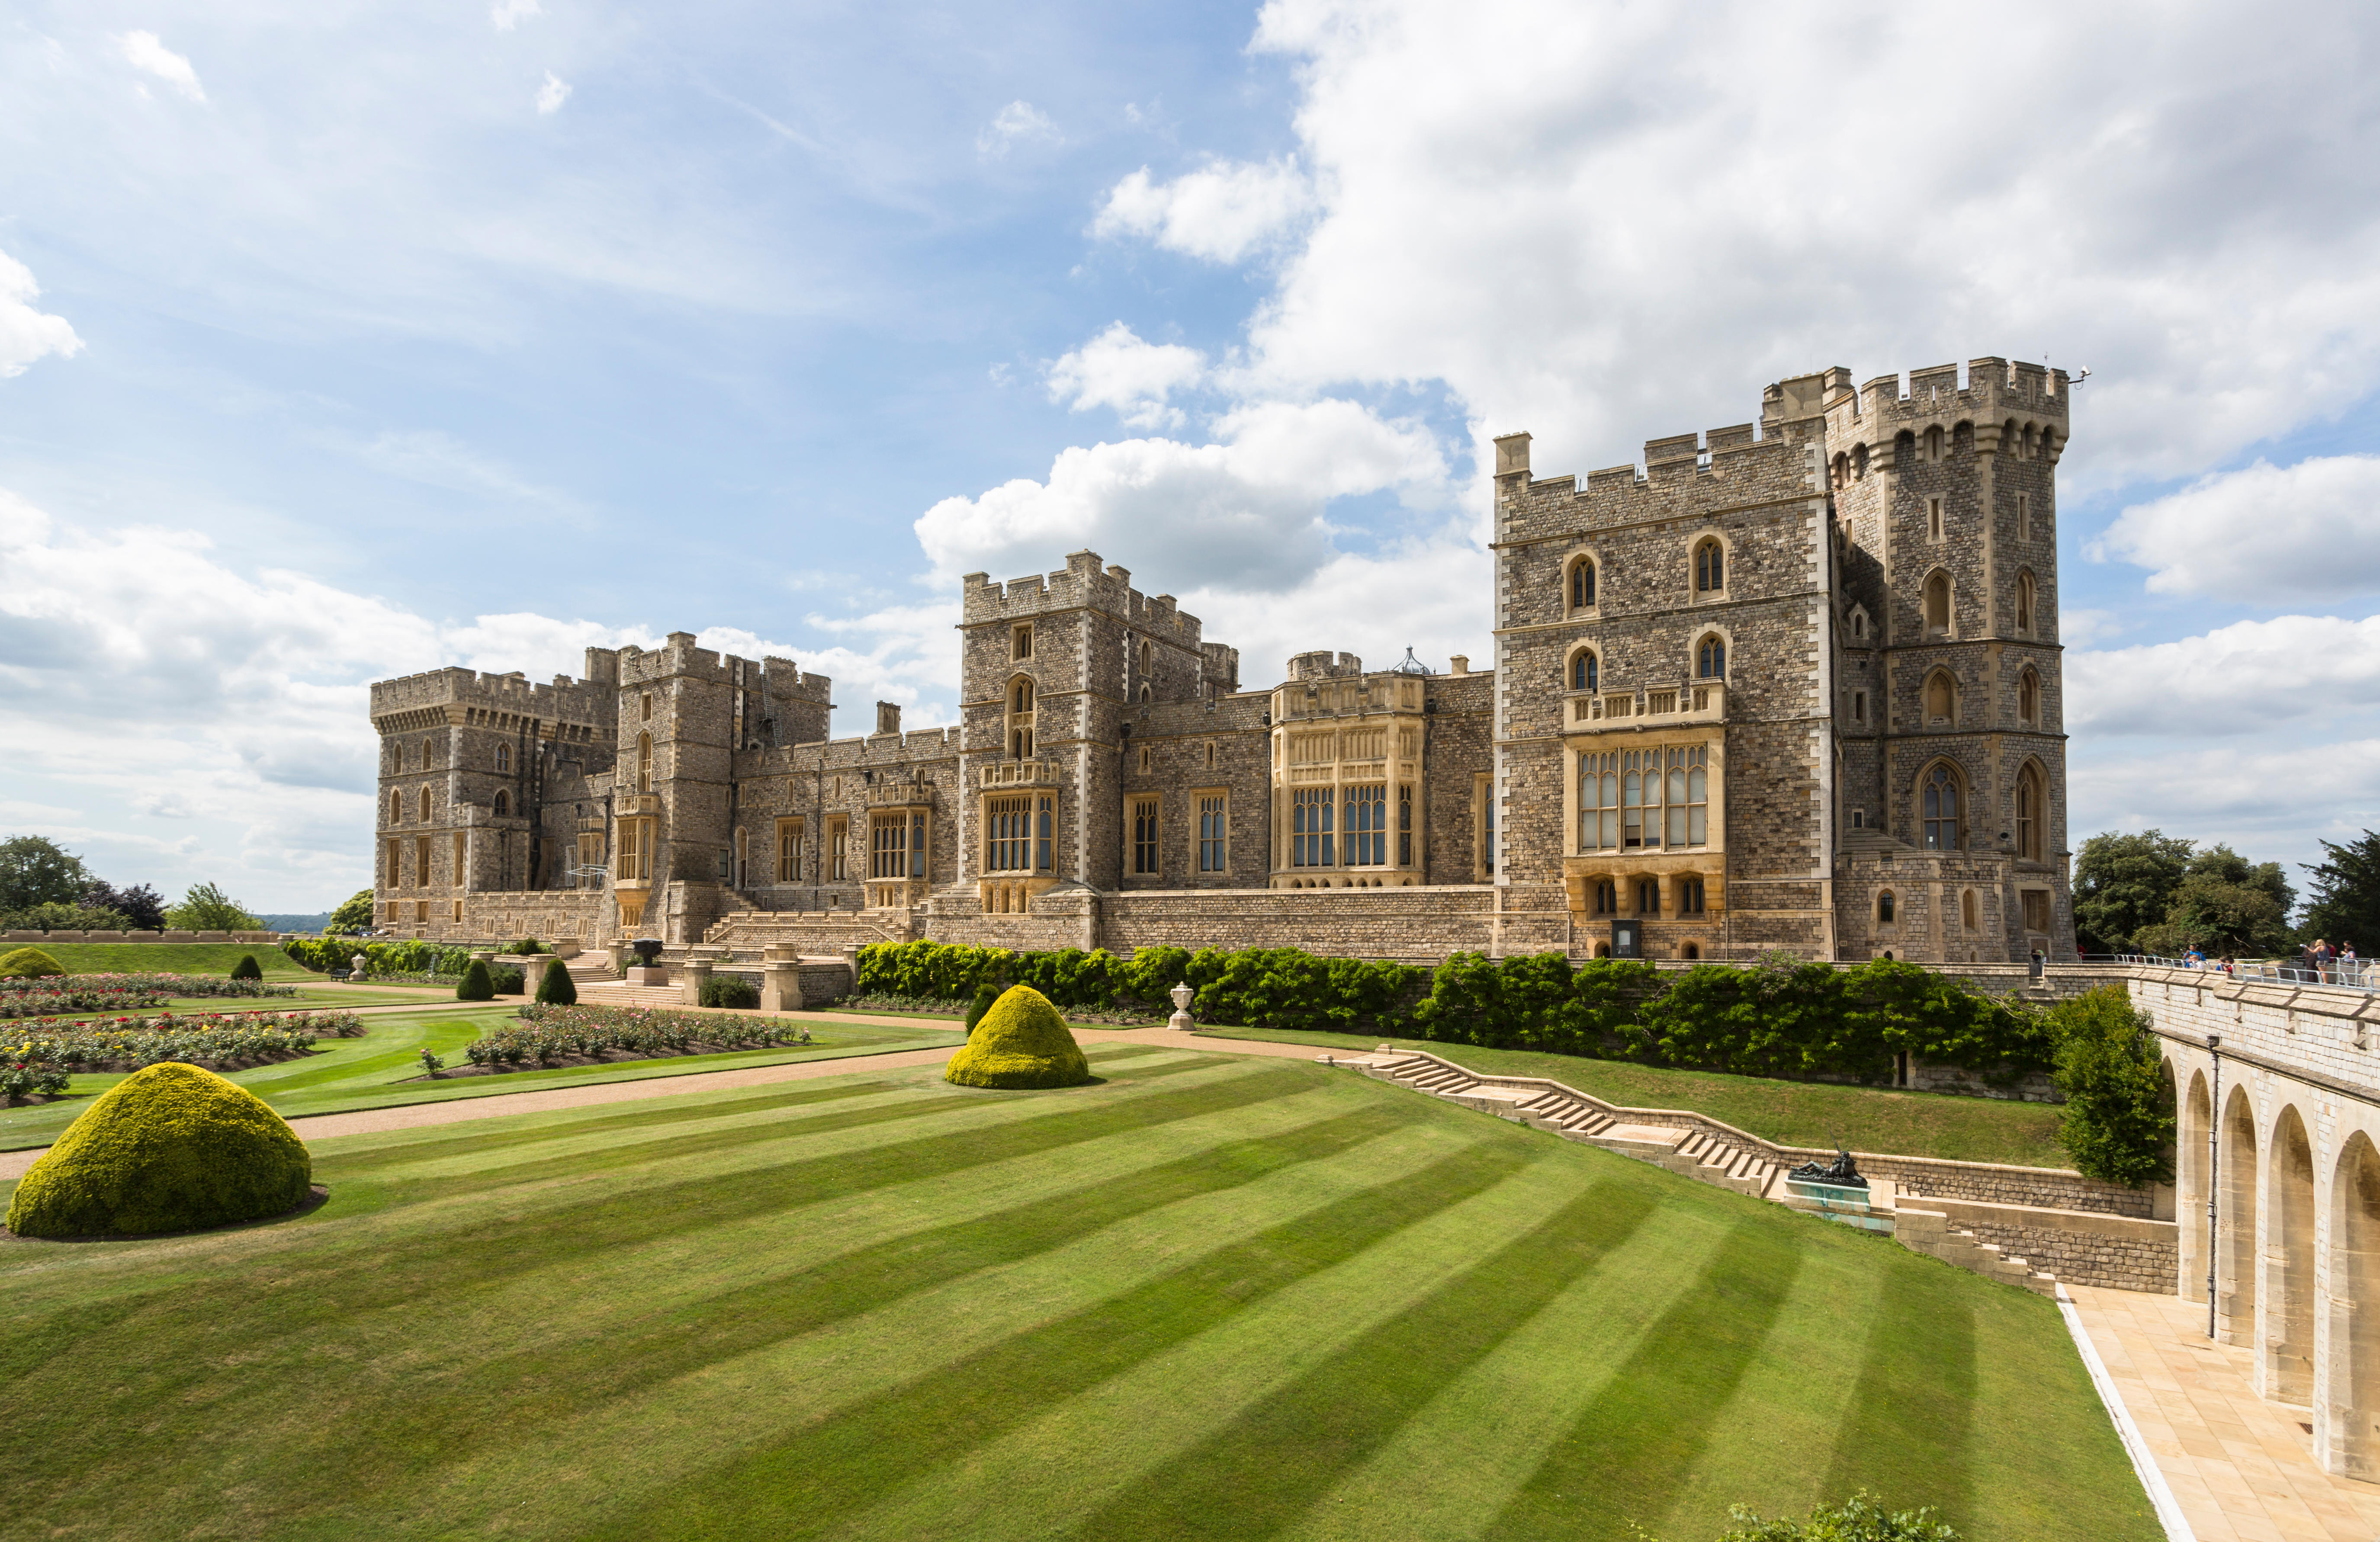 View of Windsor Castle, England, with lawns and gardens, Prince of Wales's Tower and Brunswick Tower